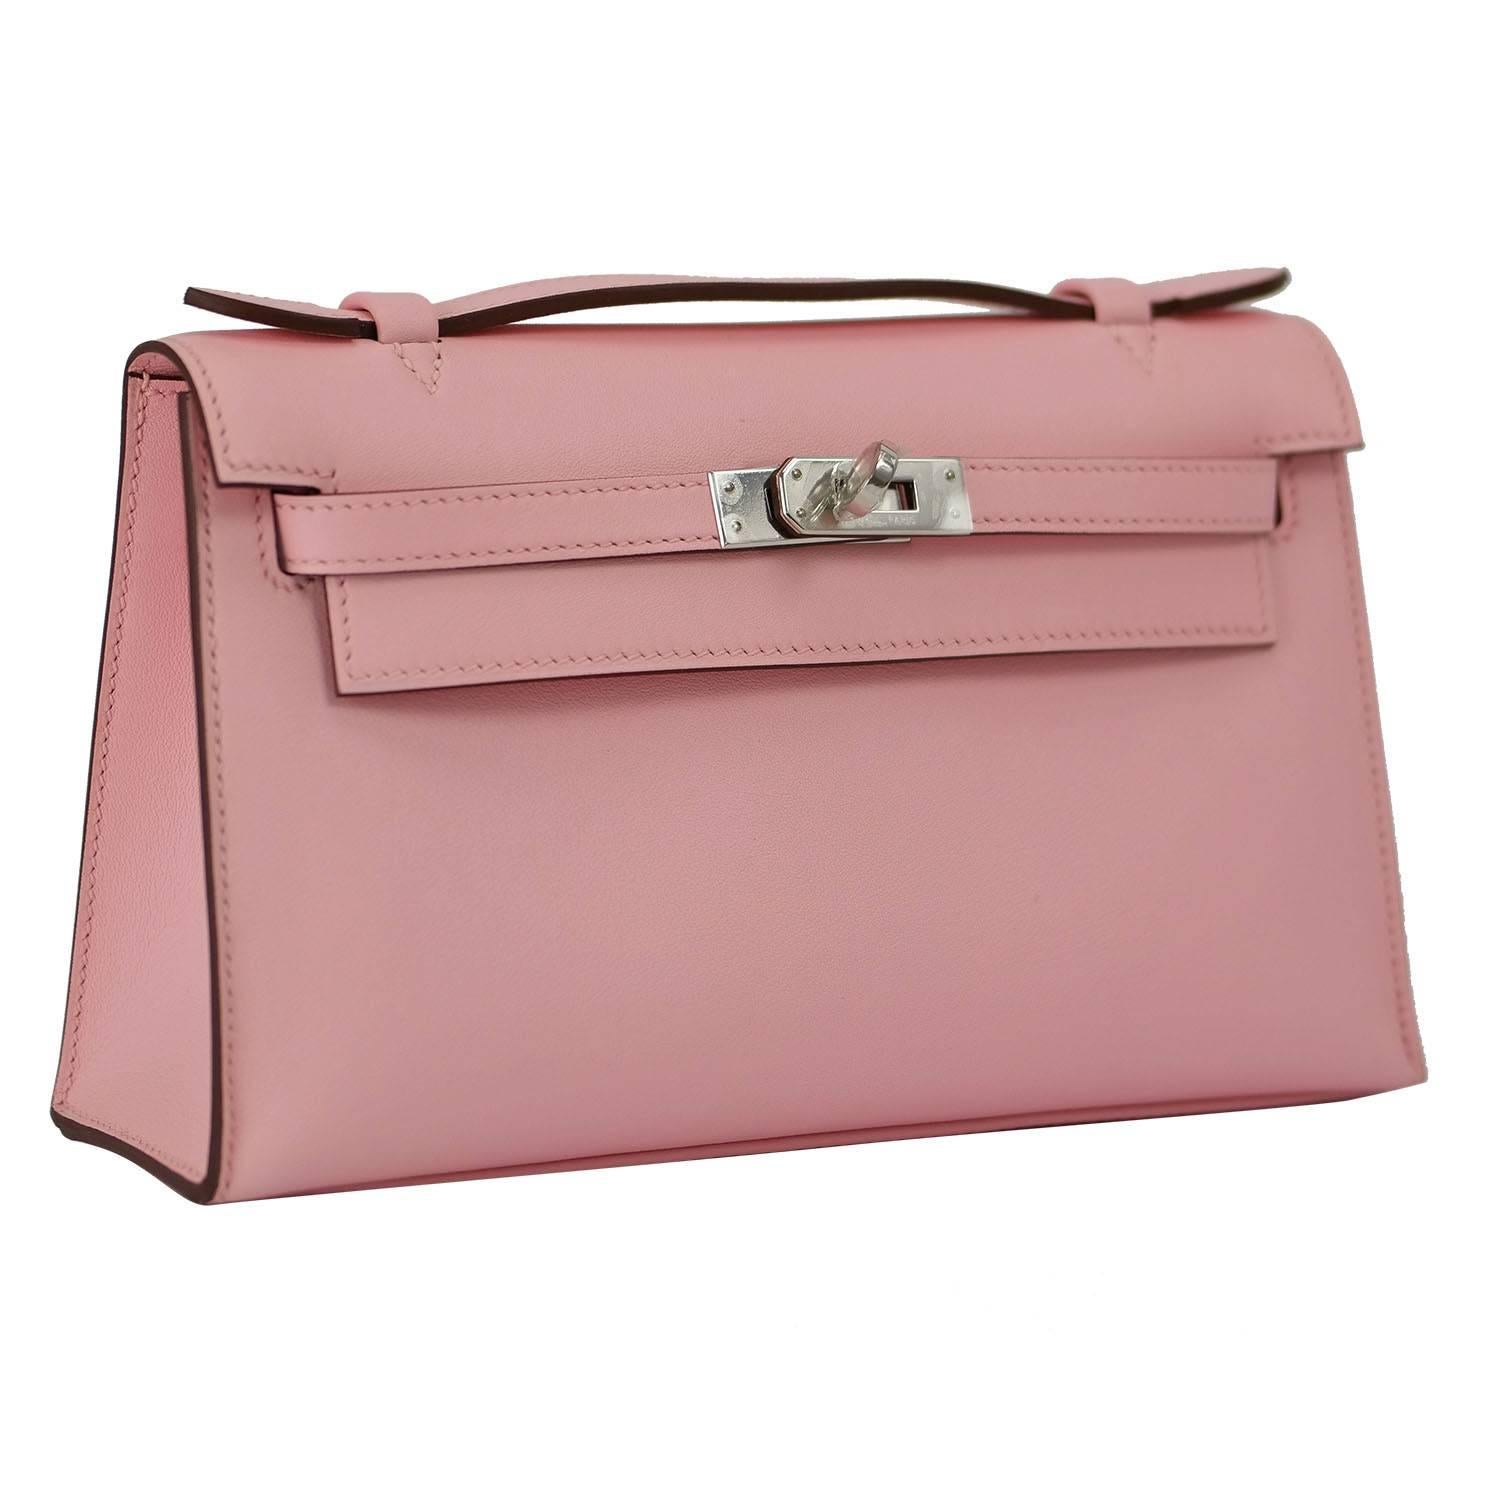 Hermes Mini Kelly Rose Sakura Palladium Hardware 2016.

Bought it in Hermes store in 2016

Pre-owned and never used.

Model: Mini Kelly

Dimension: 22cm width x 13cm height x 7cm length.

Leather; Swift

Color: Rose